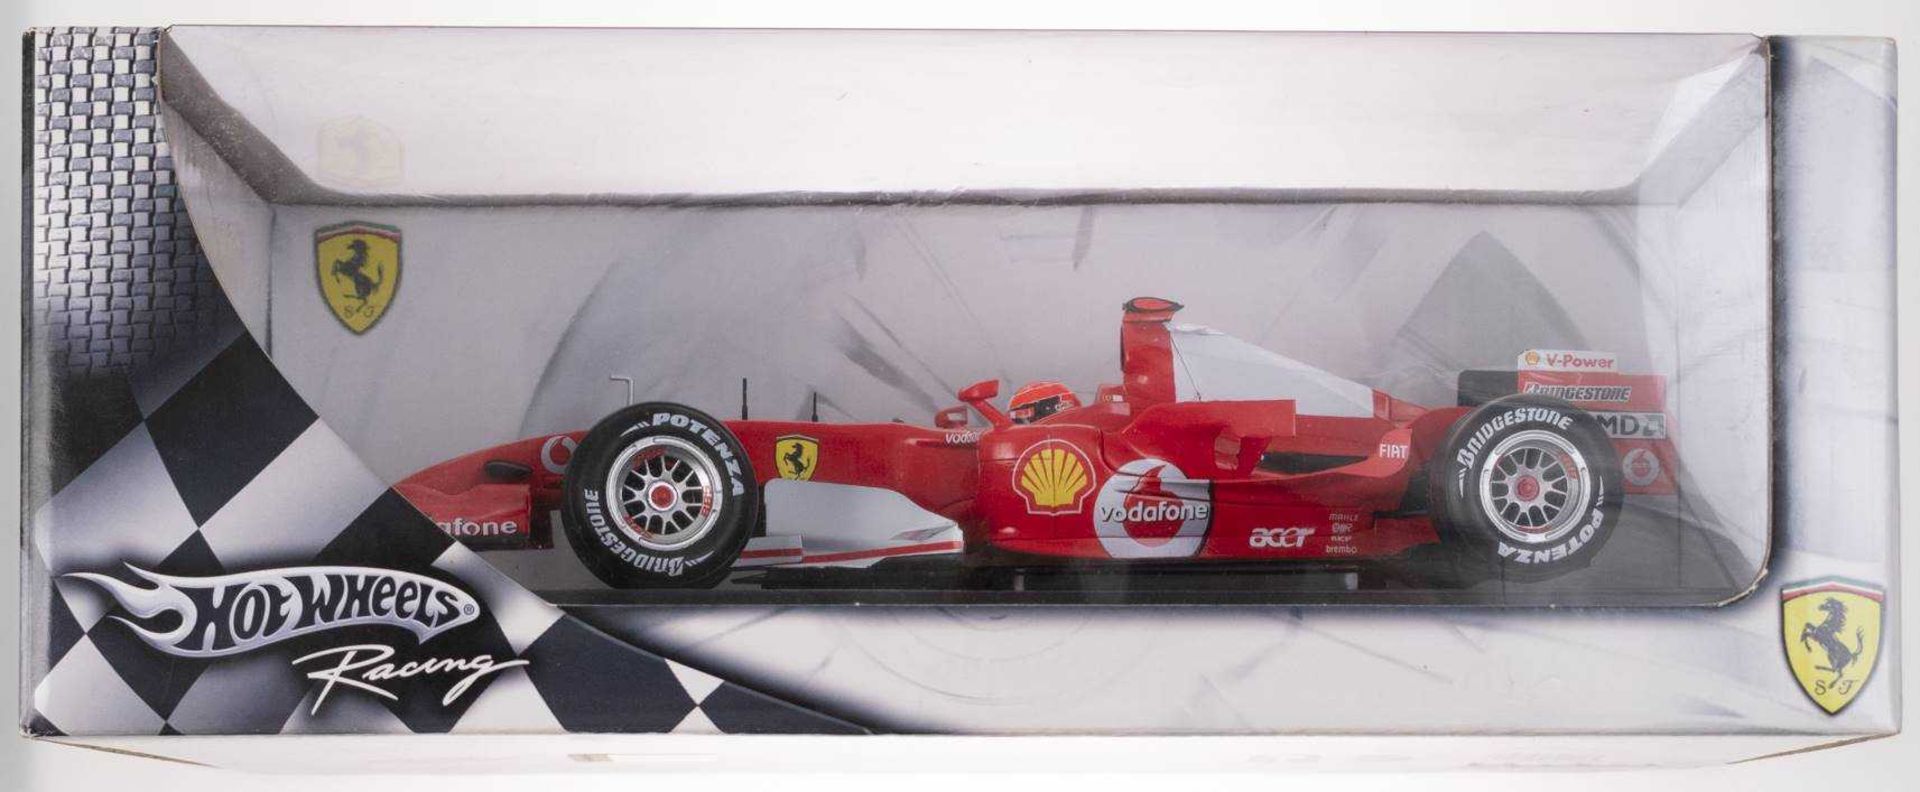 FERRARI 248 / 1, F2001 as well the limited special edition models 2003 World champion and 150 Ferrar - Image 2 of 2